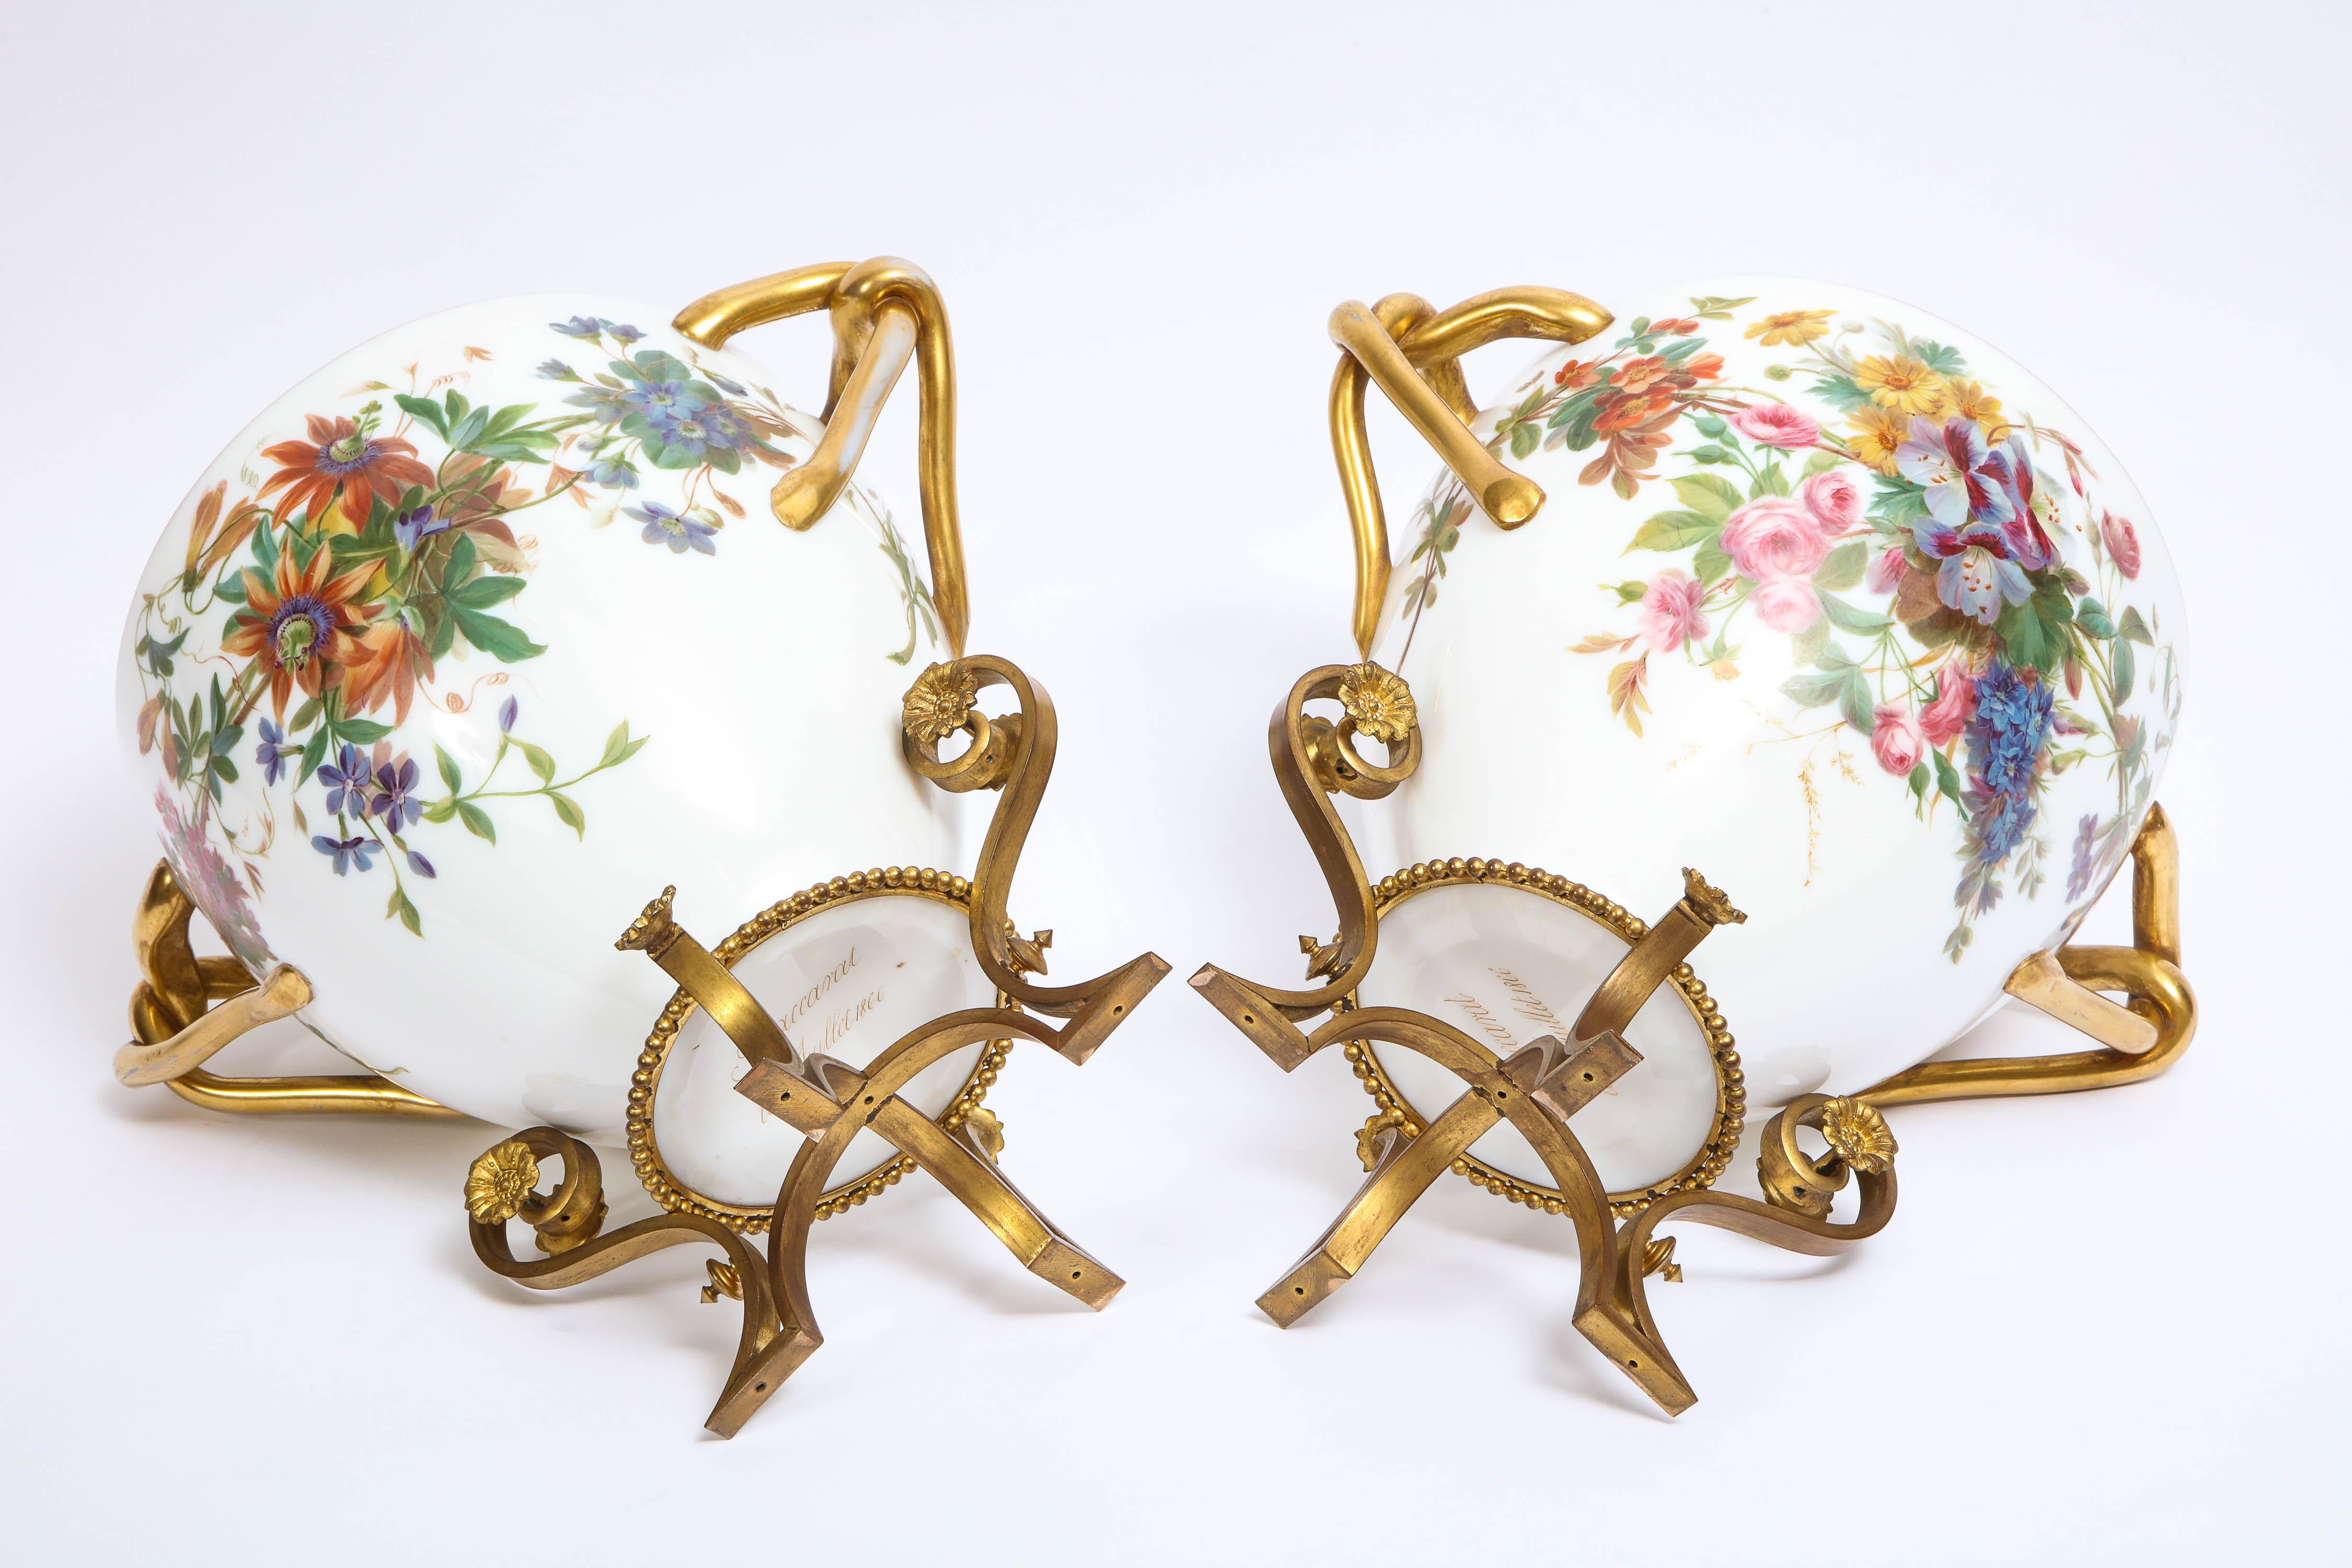 Important Pair of Enamel Hand-Painted White Opaline Vases Signed by Baccarat For Sale 5